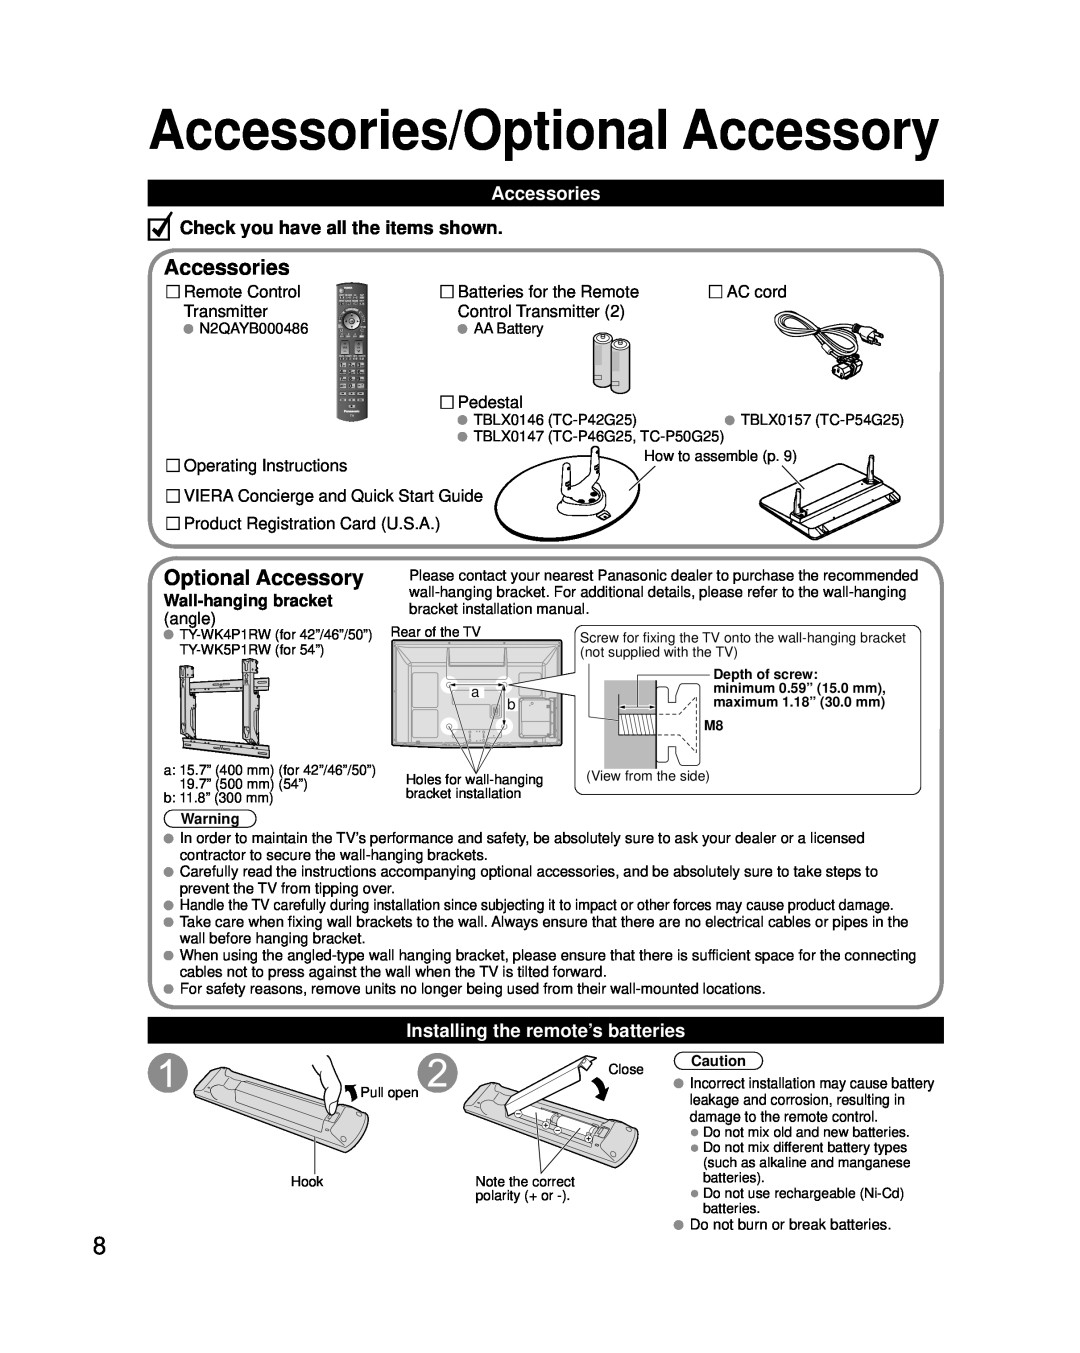 Panasonic TC-P42G25 Accessories/Optional Accessory, Check you have all the items shown, Installing the remote’s batteries 